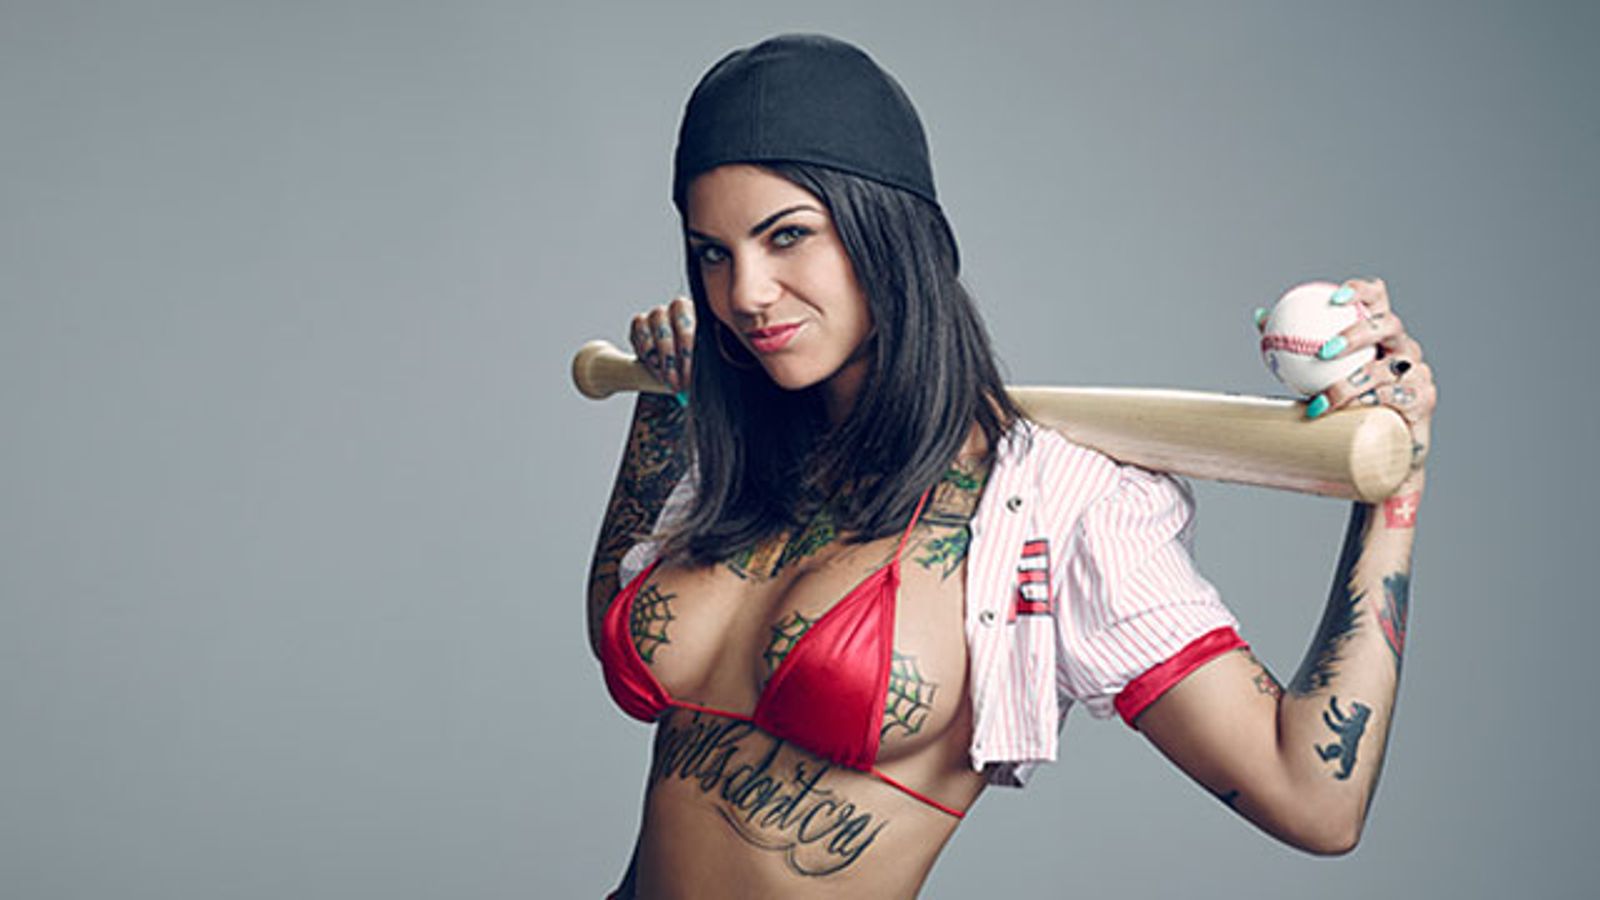 Bonnie Rotten Enters Fantasy Sports Field With Draftster.com